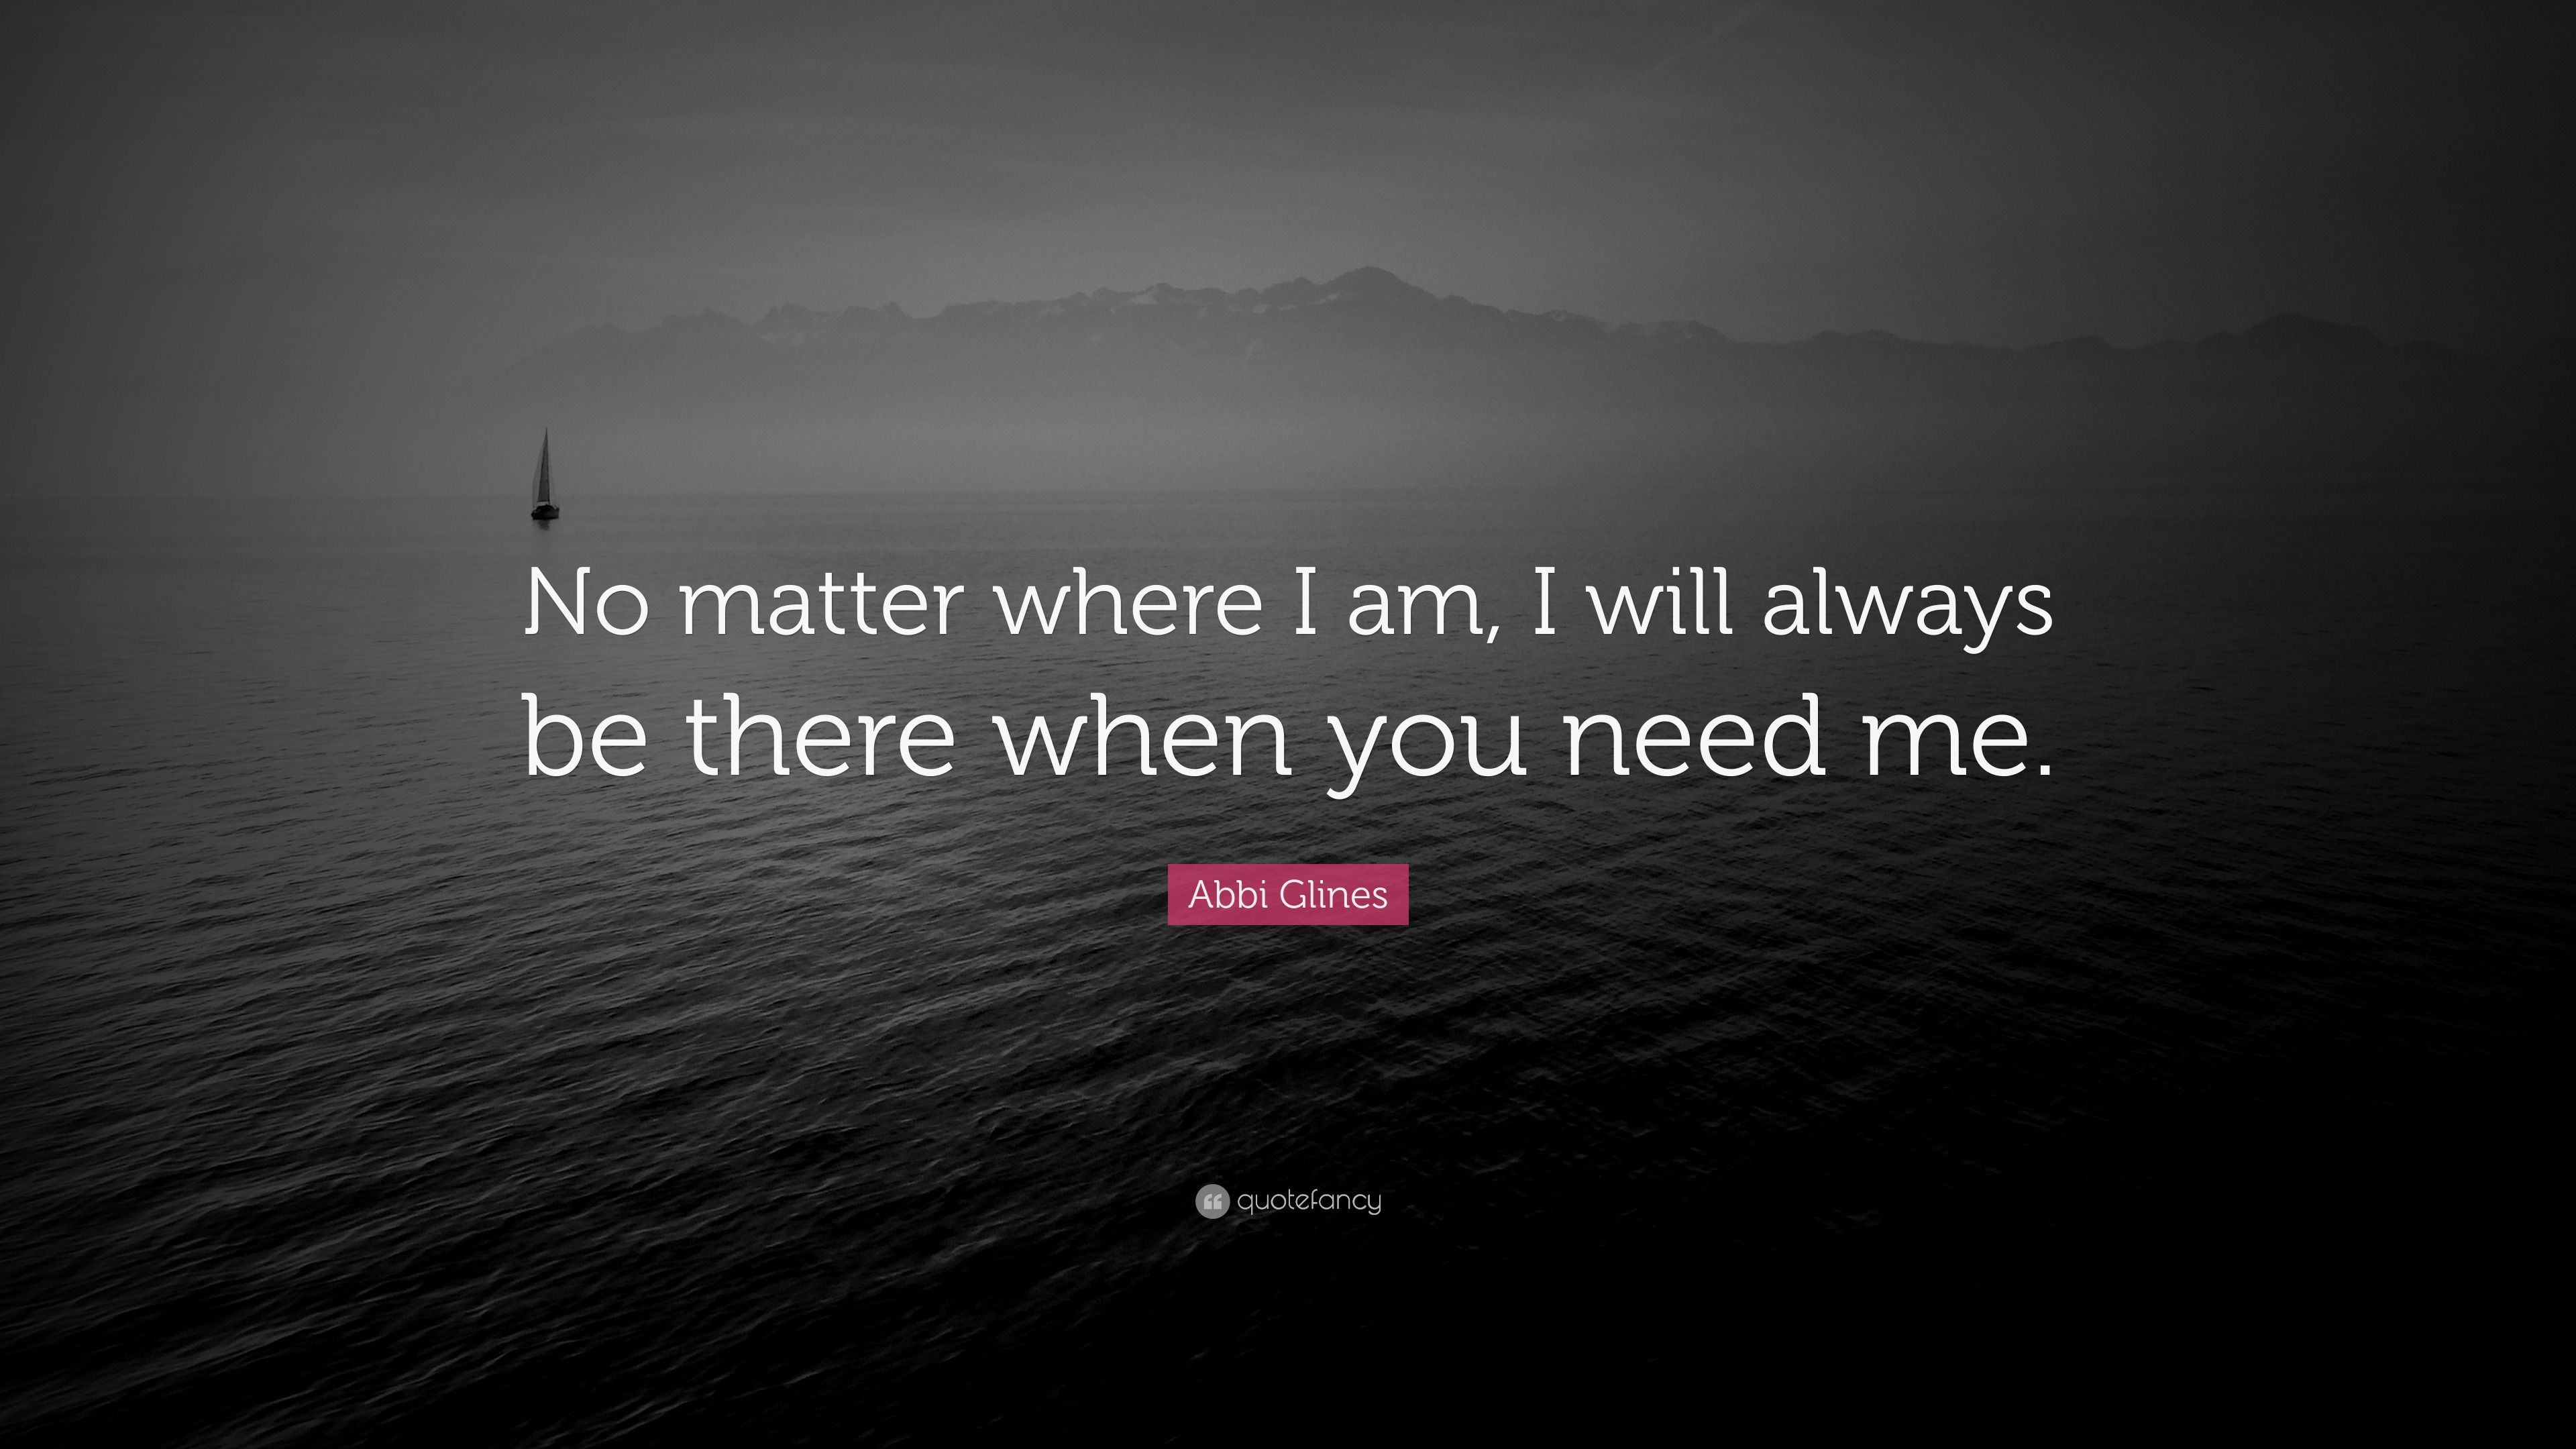 Abbi Glines Quote: “No Matter Where I Am, I Will Always Be There When You Need